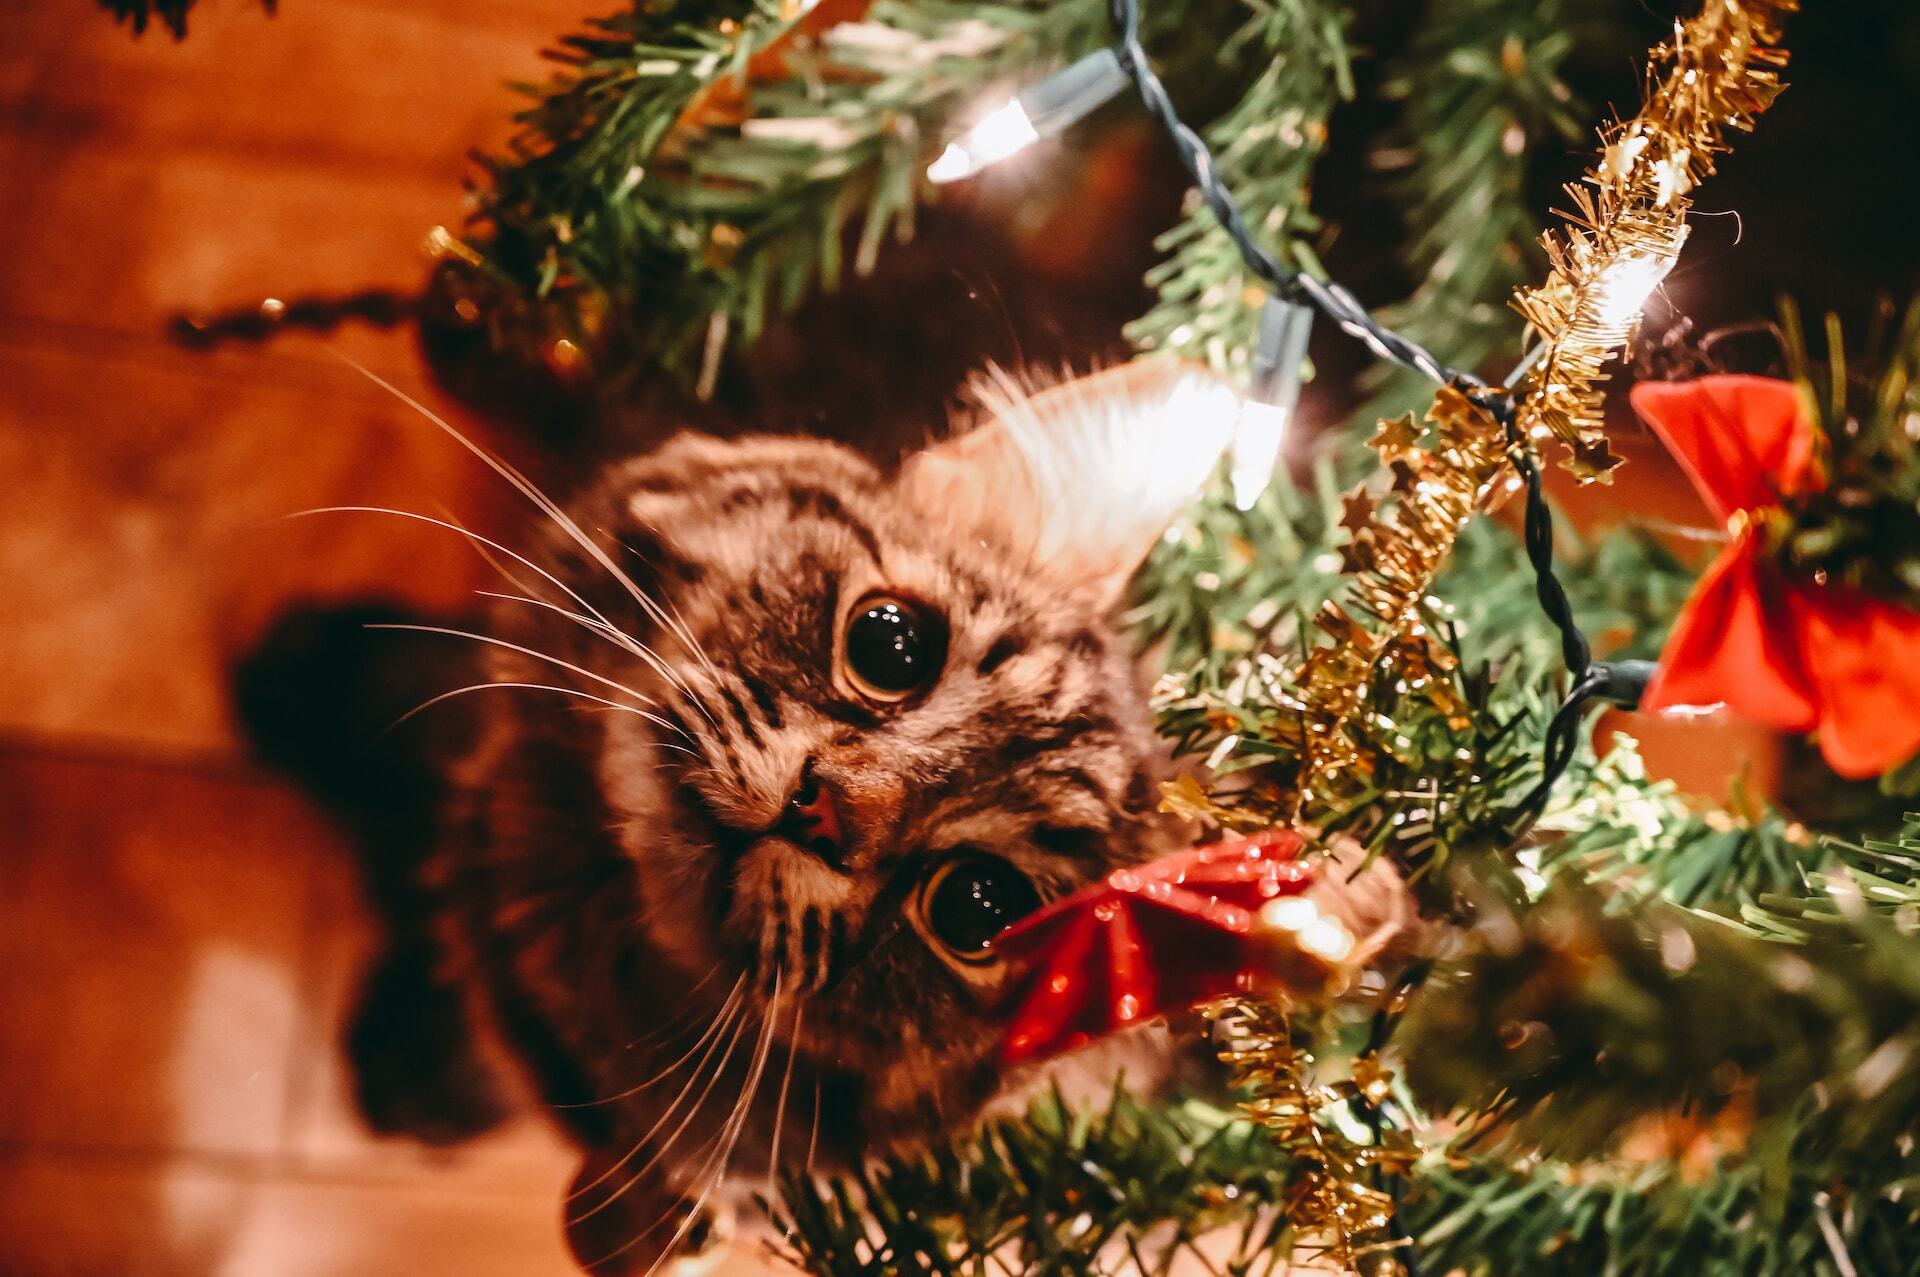 A cat sitting under a Christmas tree looking up at the lights